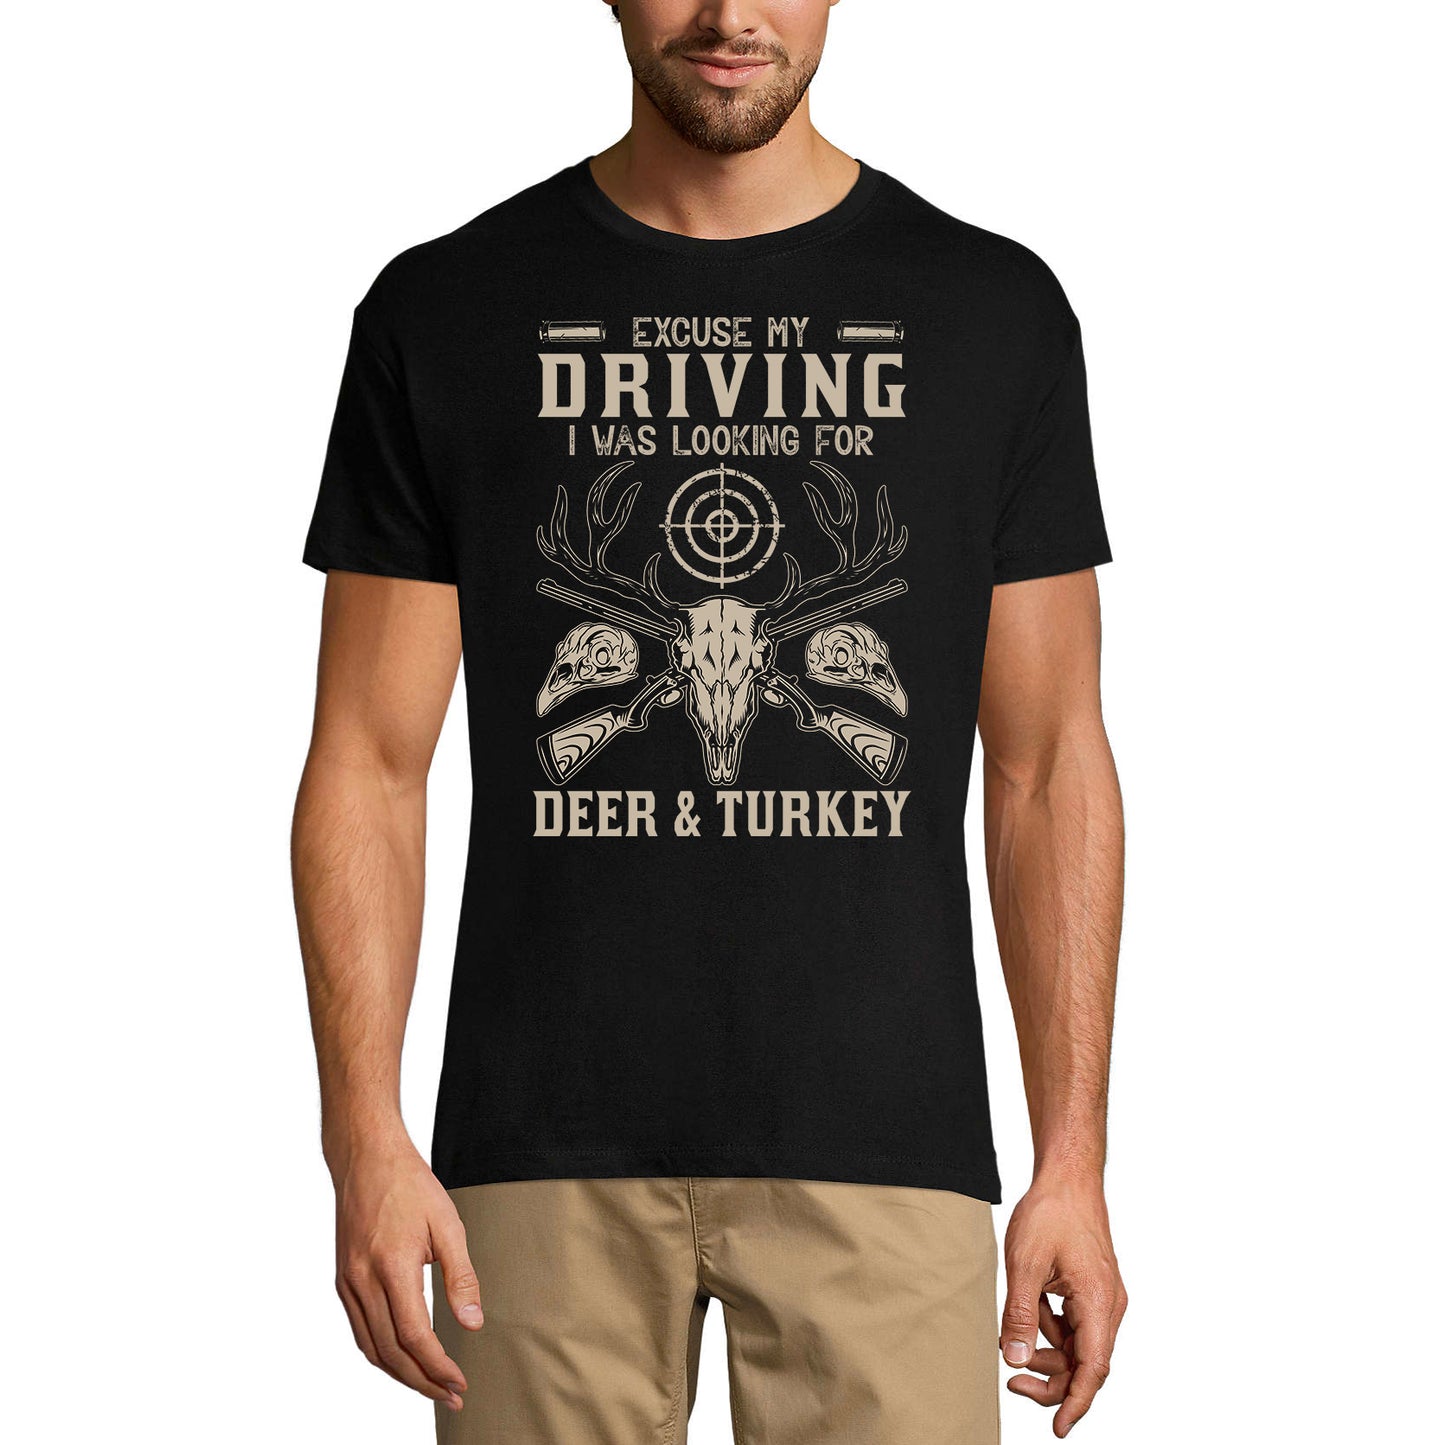 ULTRABASIC Men's T-Shirt Excuse My Driving I Was Looking for Deer and Turkey - Hunter Tee Shirt